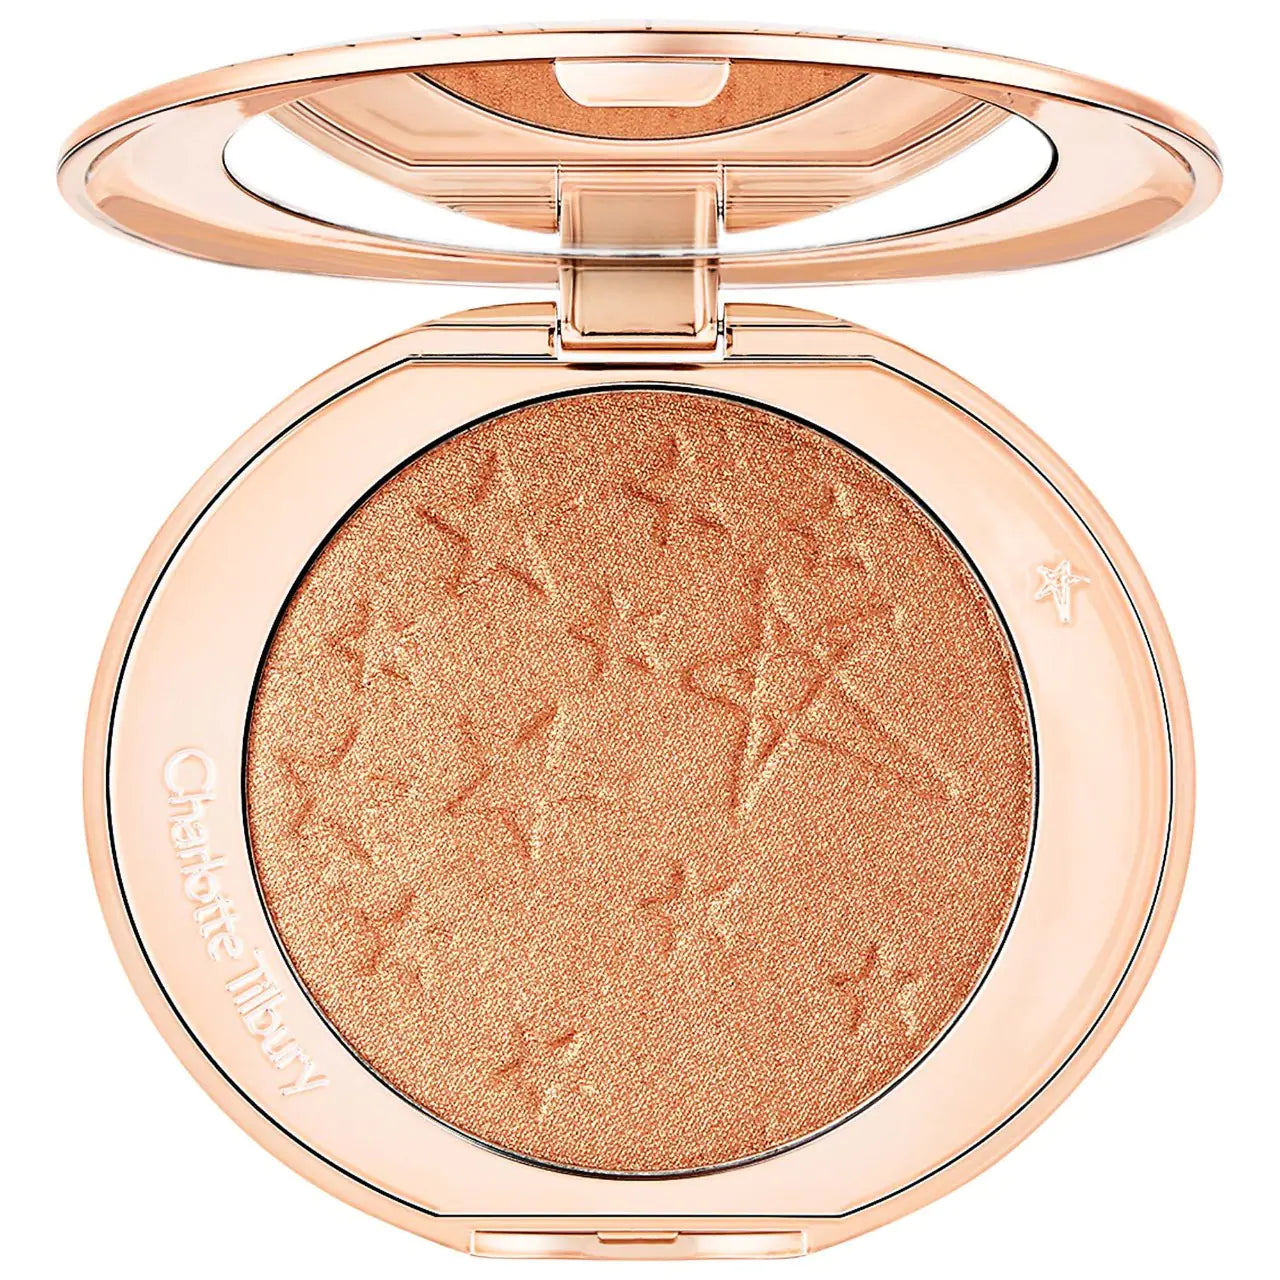 Glow Glide Face Architect Highlighter